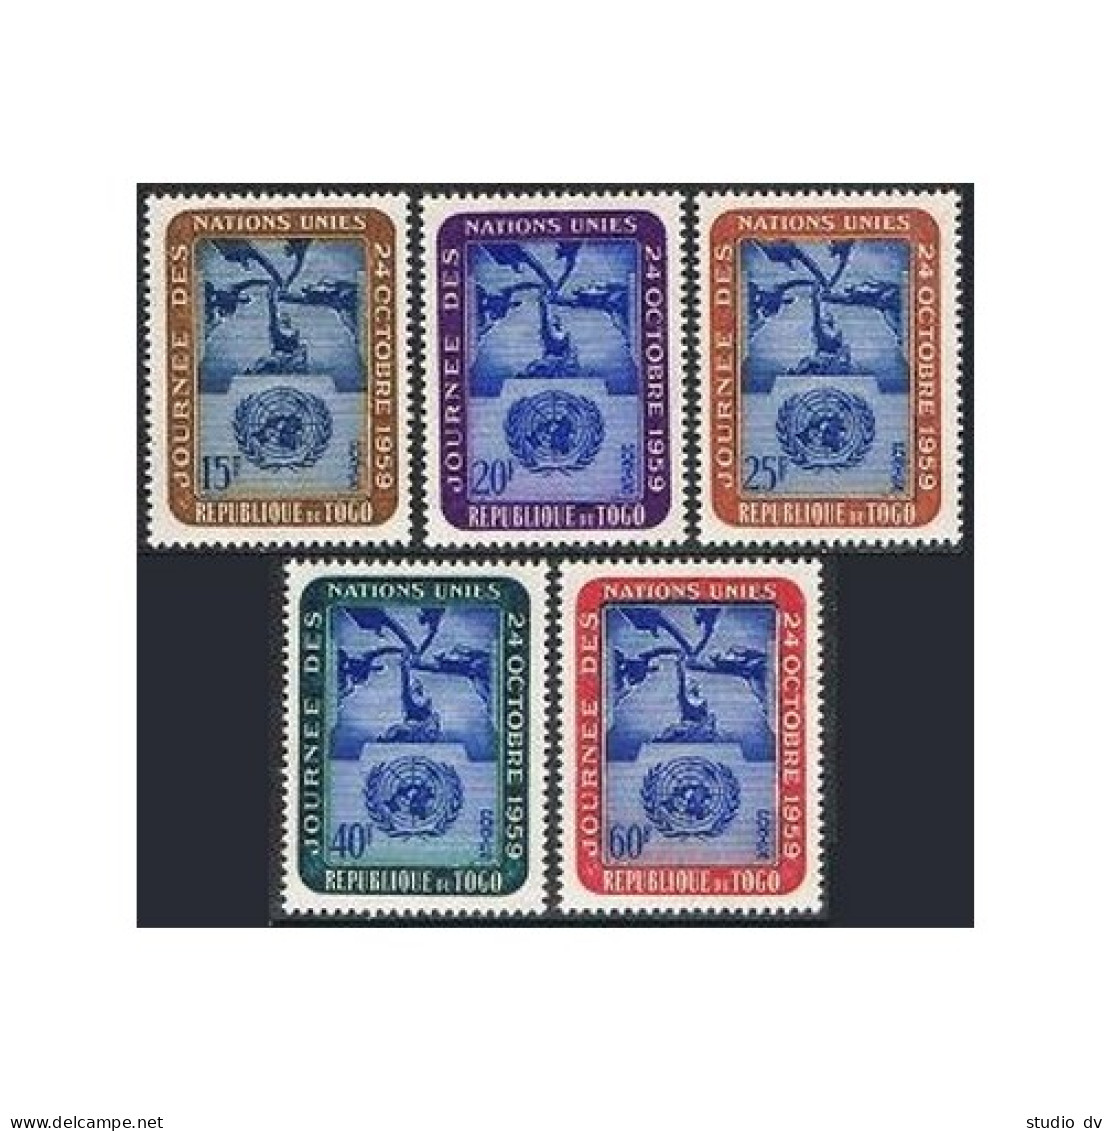 Togo 364-368, MNH. Michel 271-275. United Nations Day, 1959. Five Continents. - Togo (1960-...)